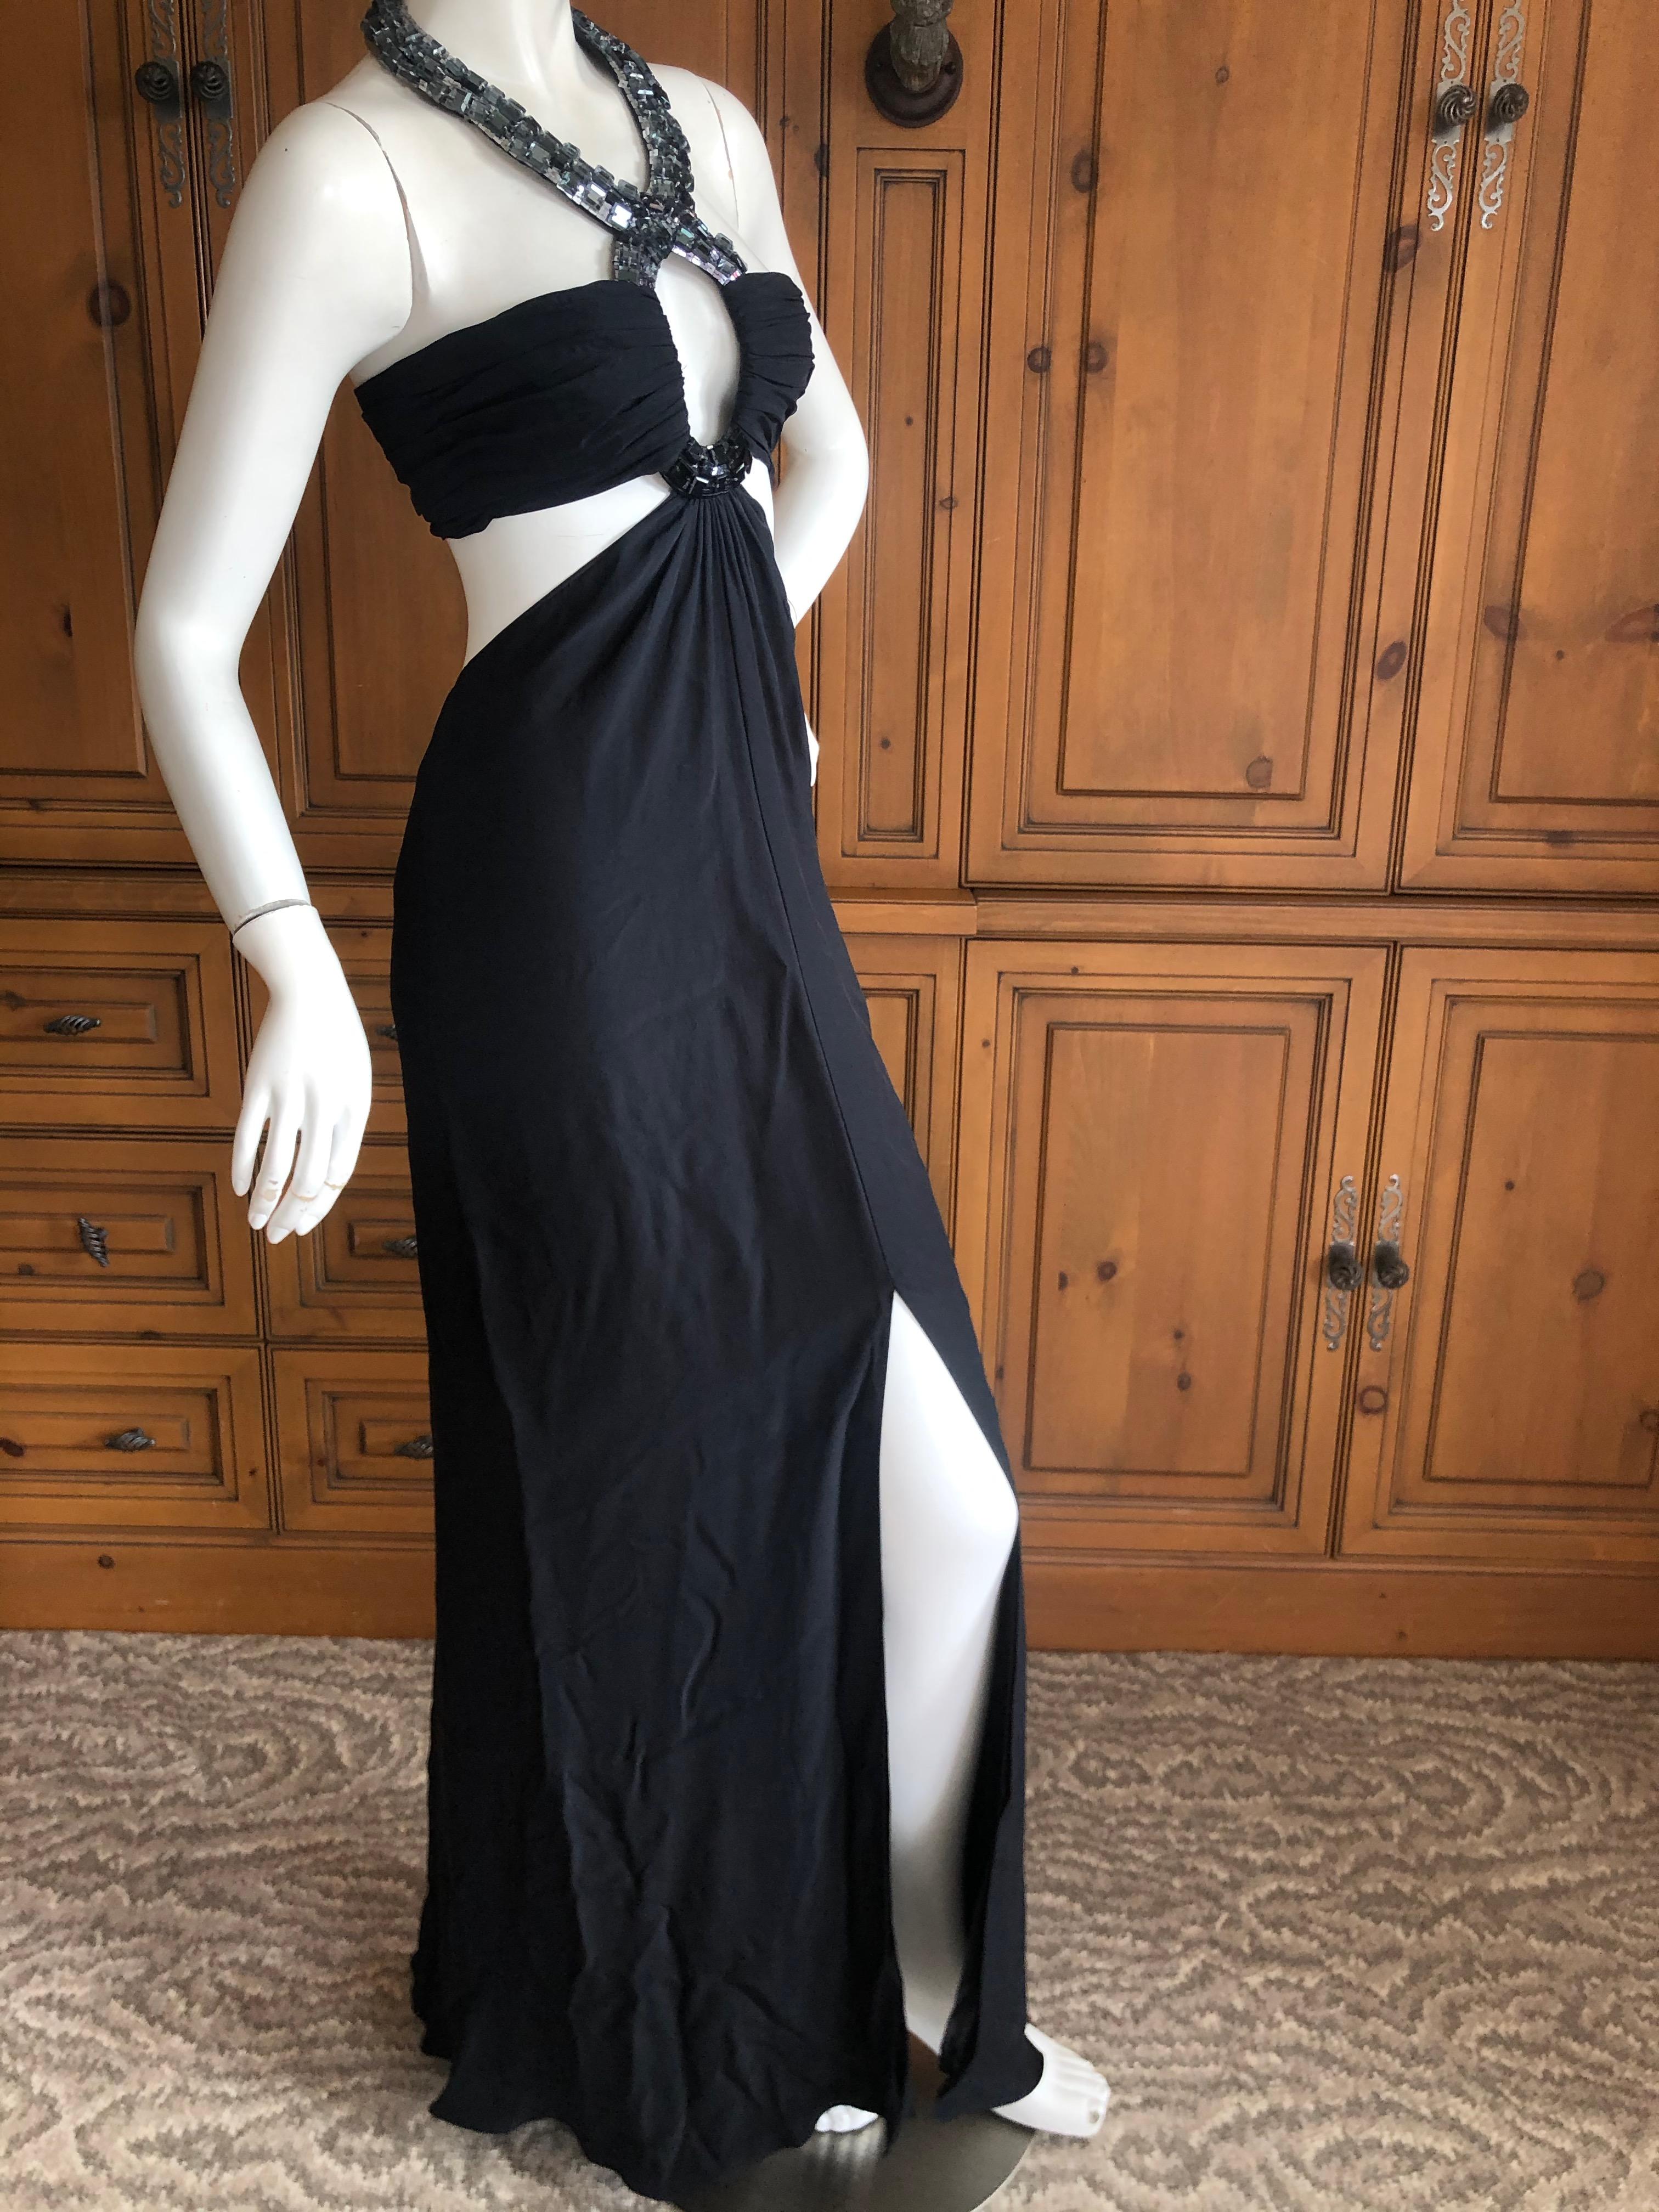 Azzaro Black Cut Out Evening Dress with Bold Crystal Jewel Details For Sale 2